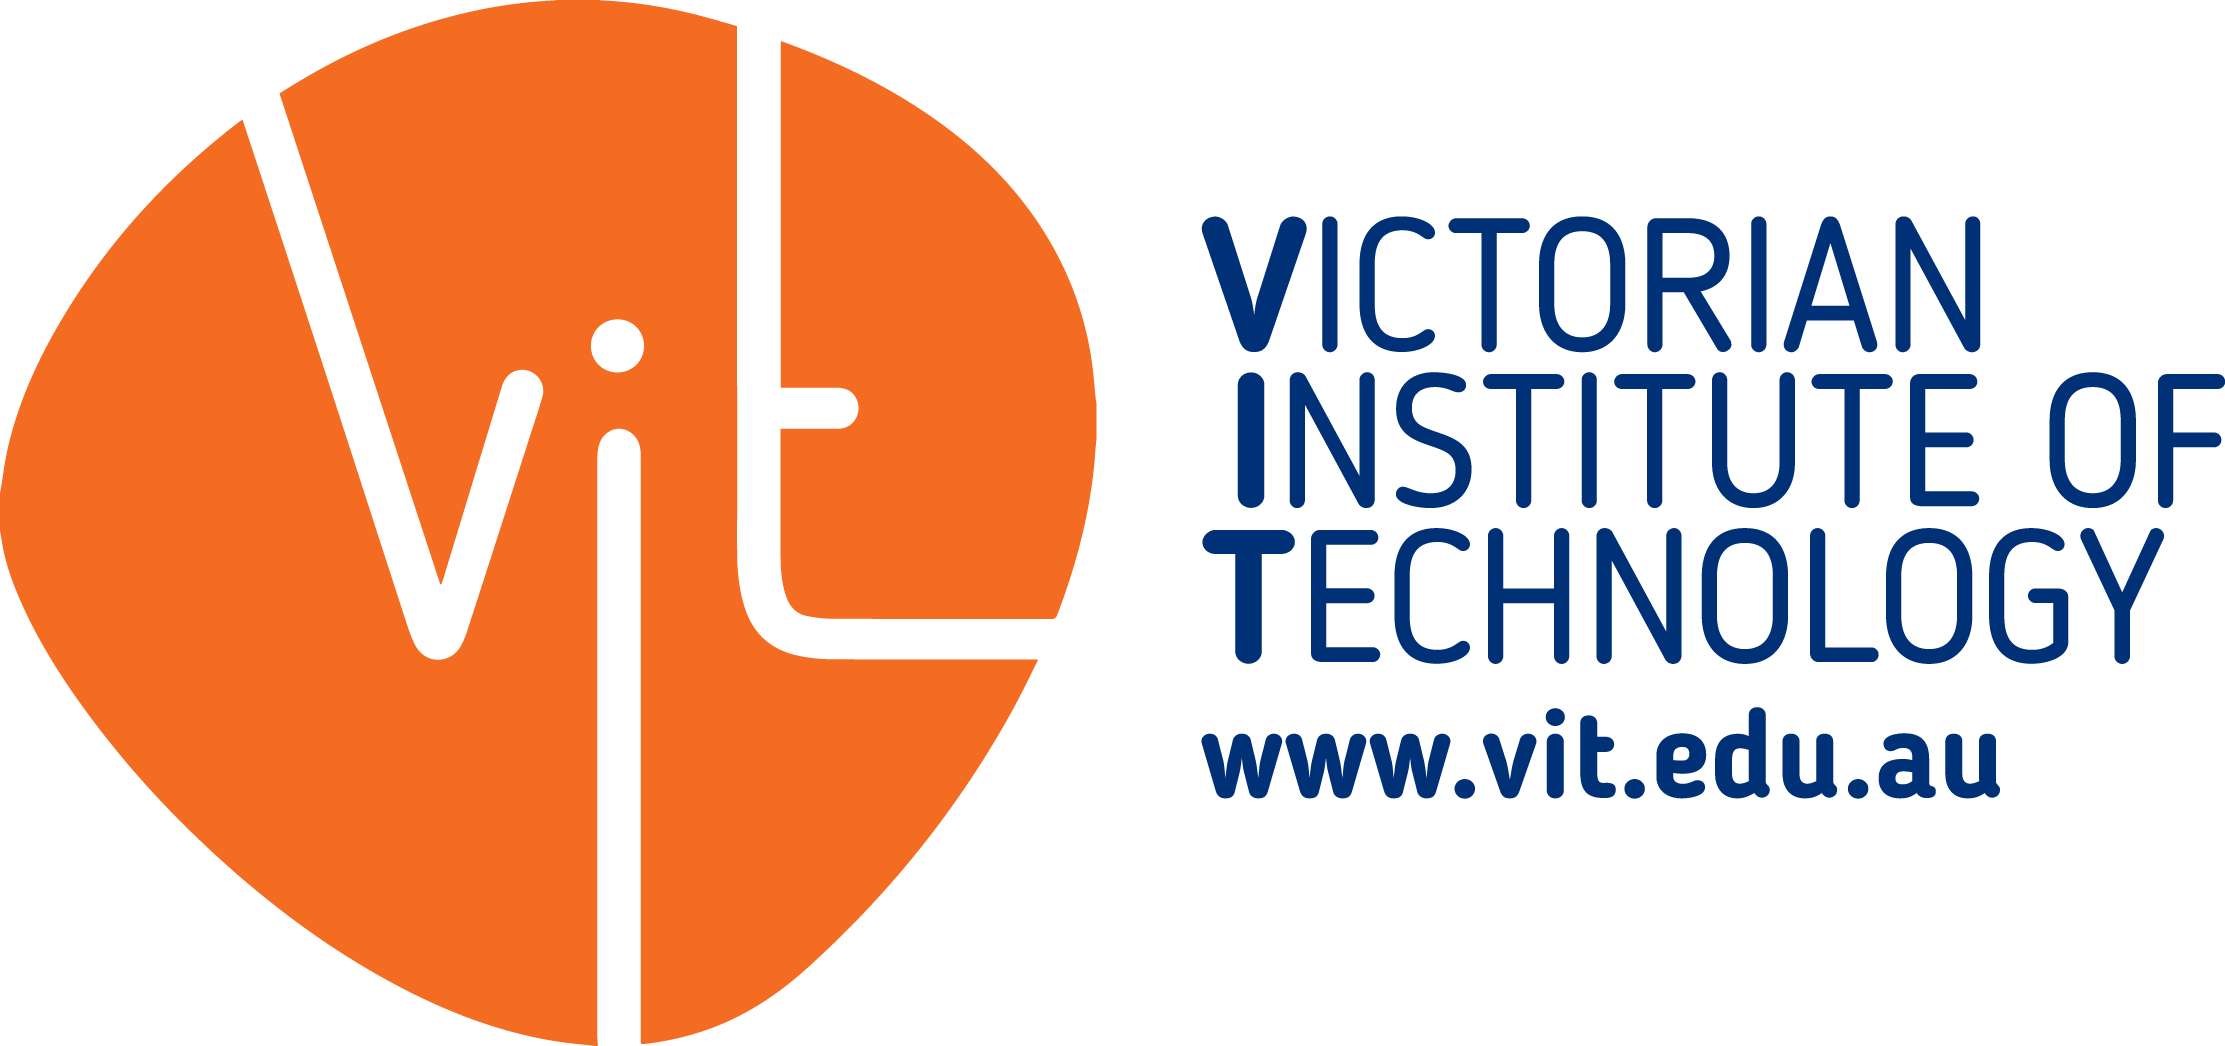 More about VIT - Victorian Institute Of Technology